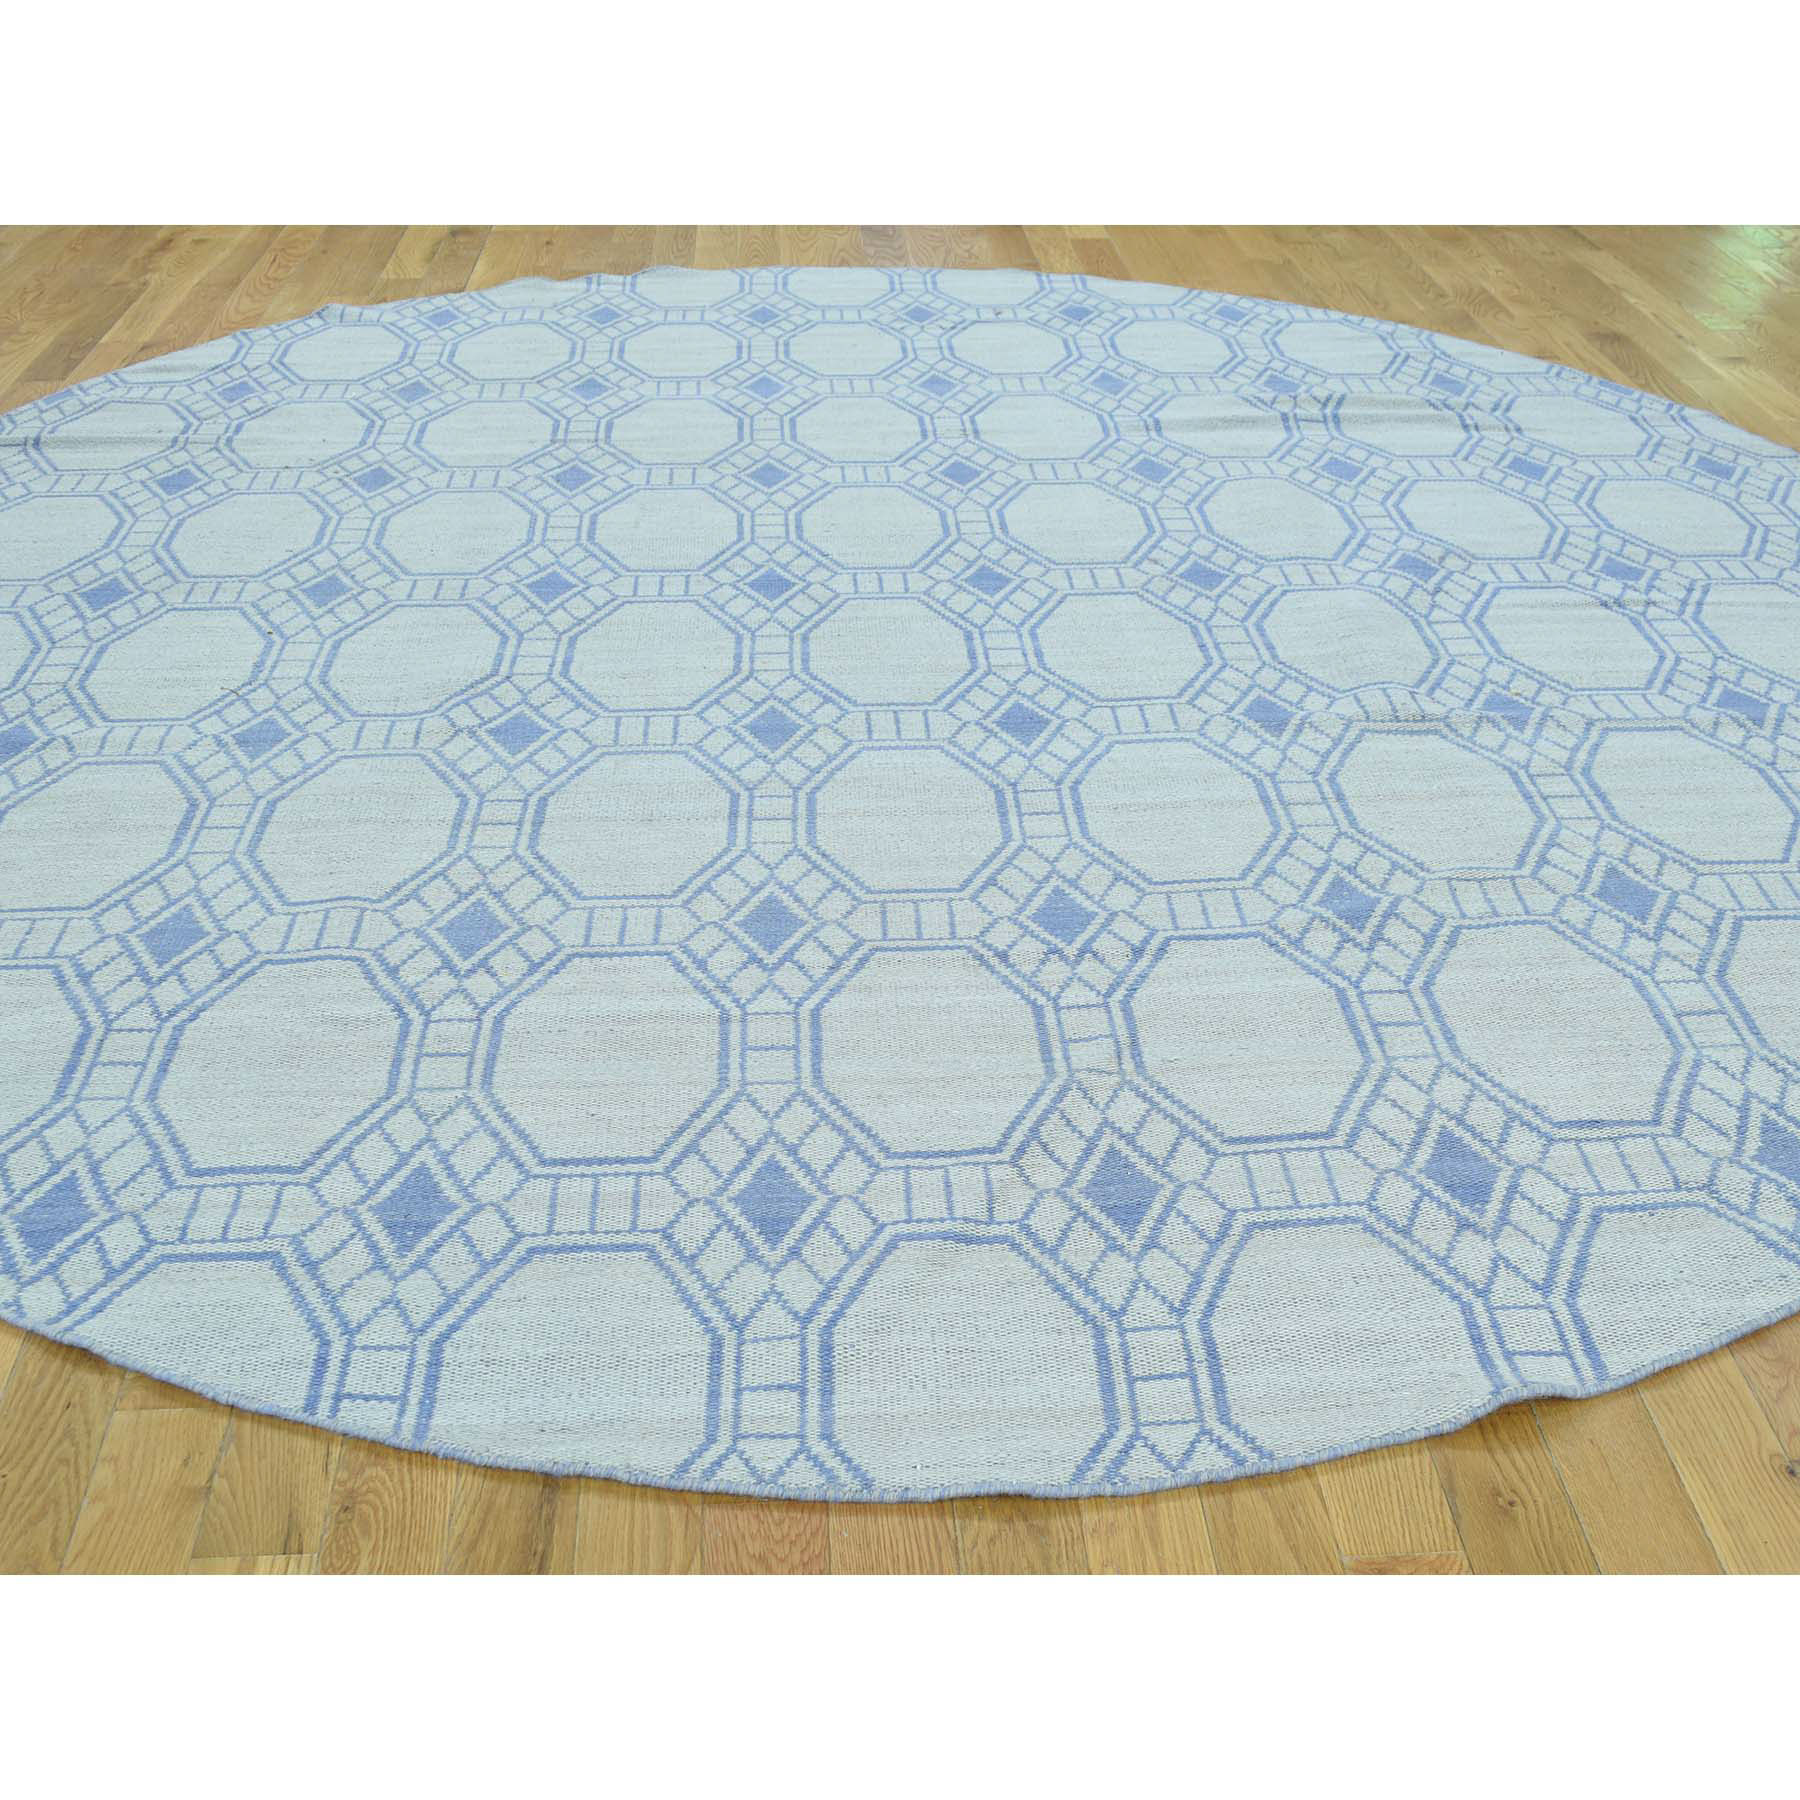 9'8"x9'8" Hand-Woven Flat Weave Reversible Durie Kilim Round Oriental Rug 